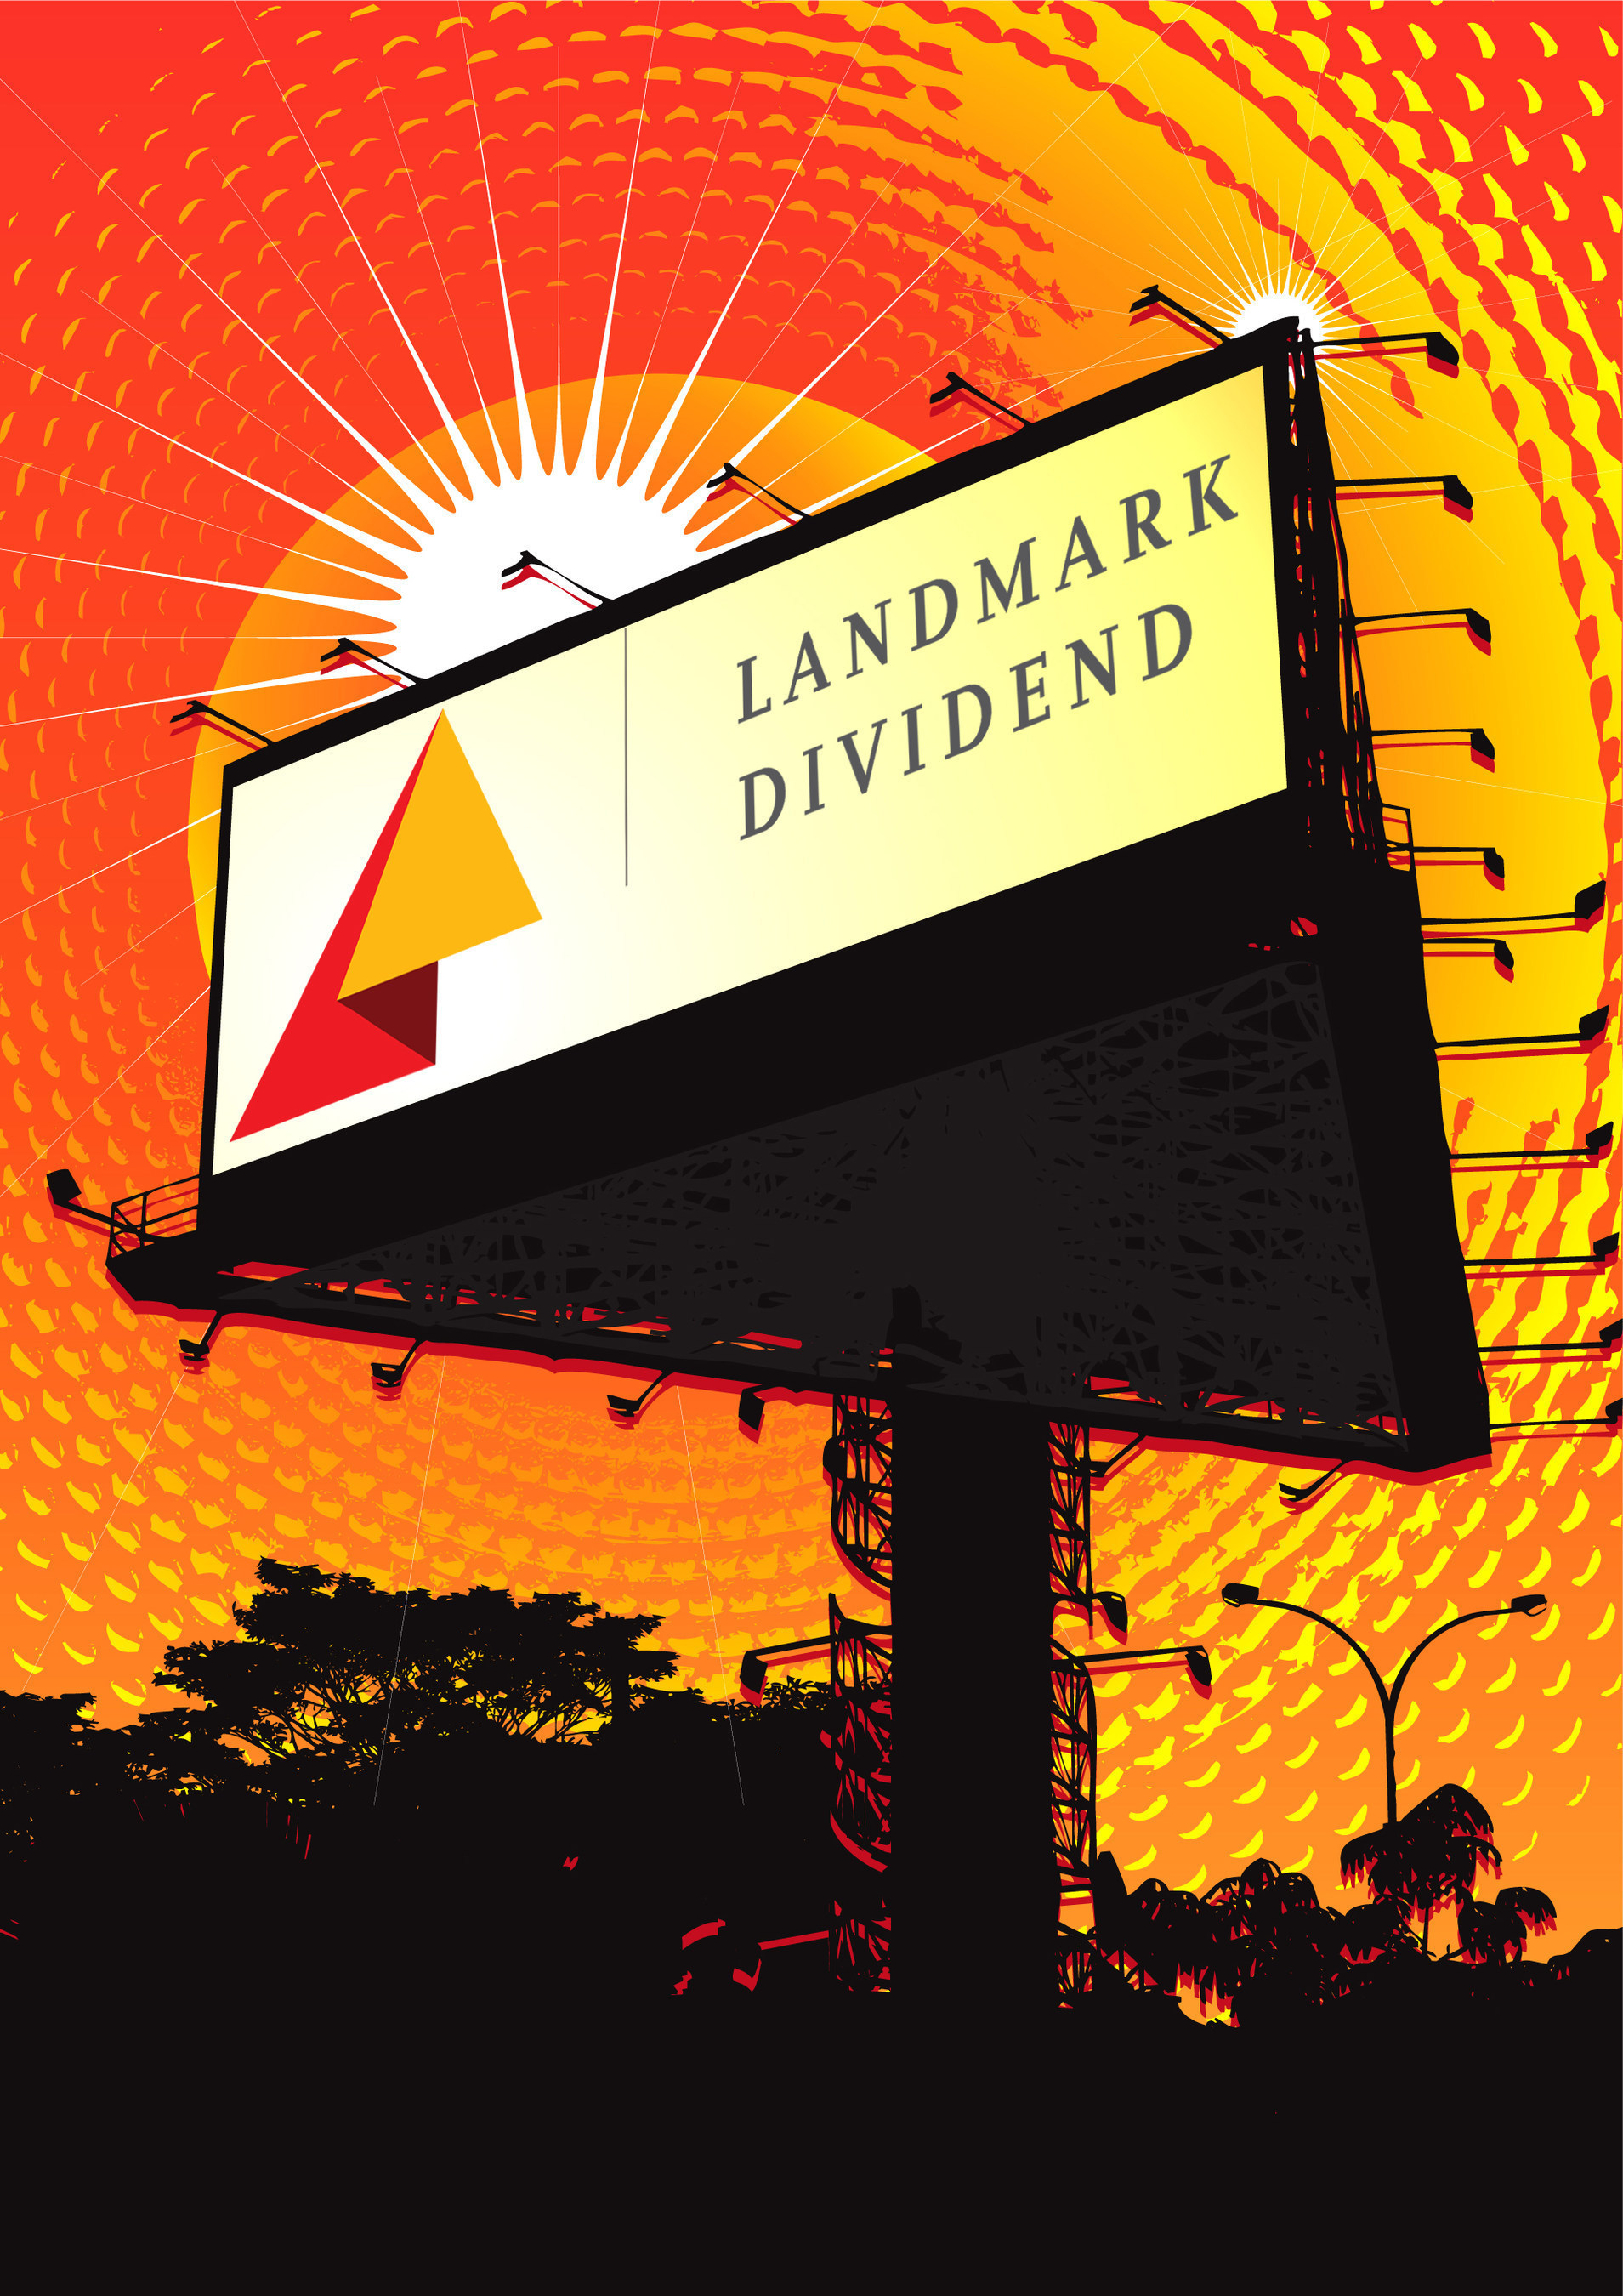 Landmark Dividend, one of the nation's largest lease acquisition companies, is expanding its presence in the billboard industry by providing strategic capital to outdoor advertising companies and helping them extend the longevity of ground leases while reducing costs. Landmark Dividend's core business is buying existing ground leases for billboards, cellular towers and alternative energy infrastructures, such as wind turbines and solar farm tracks.